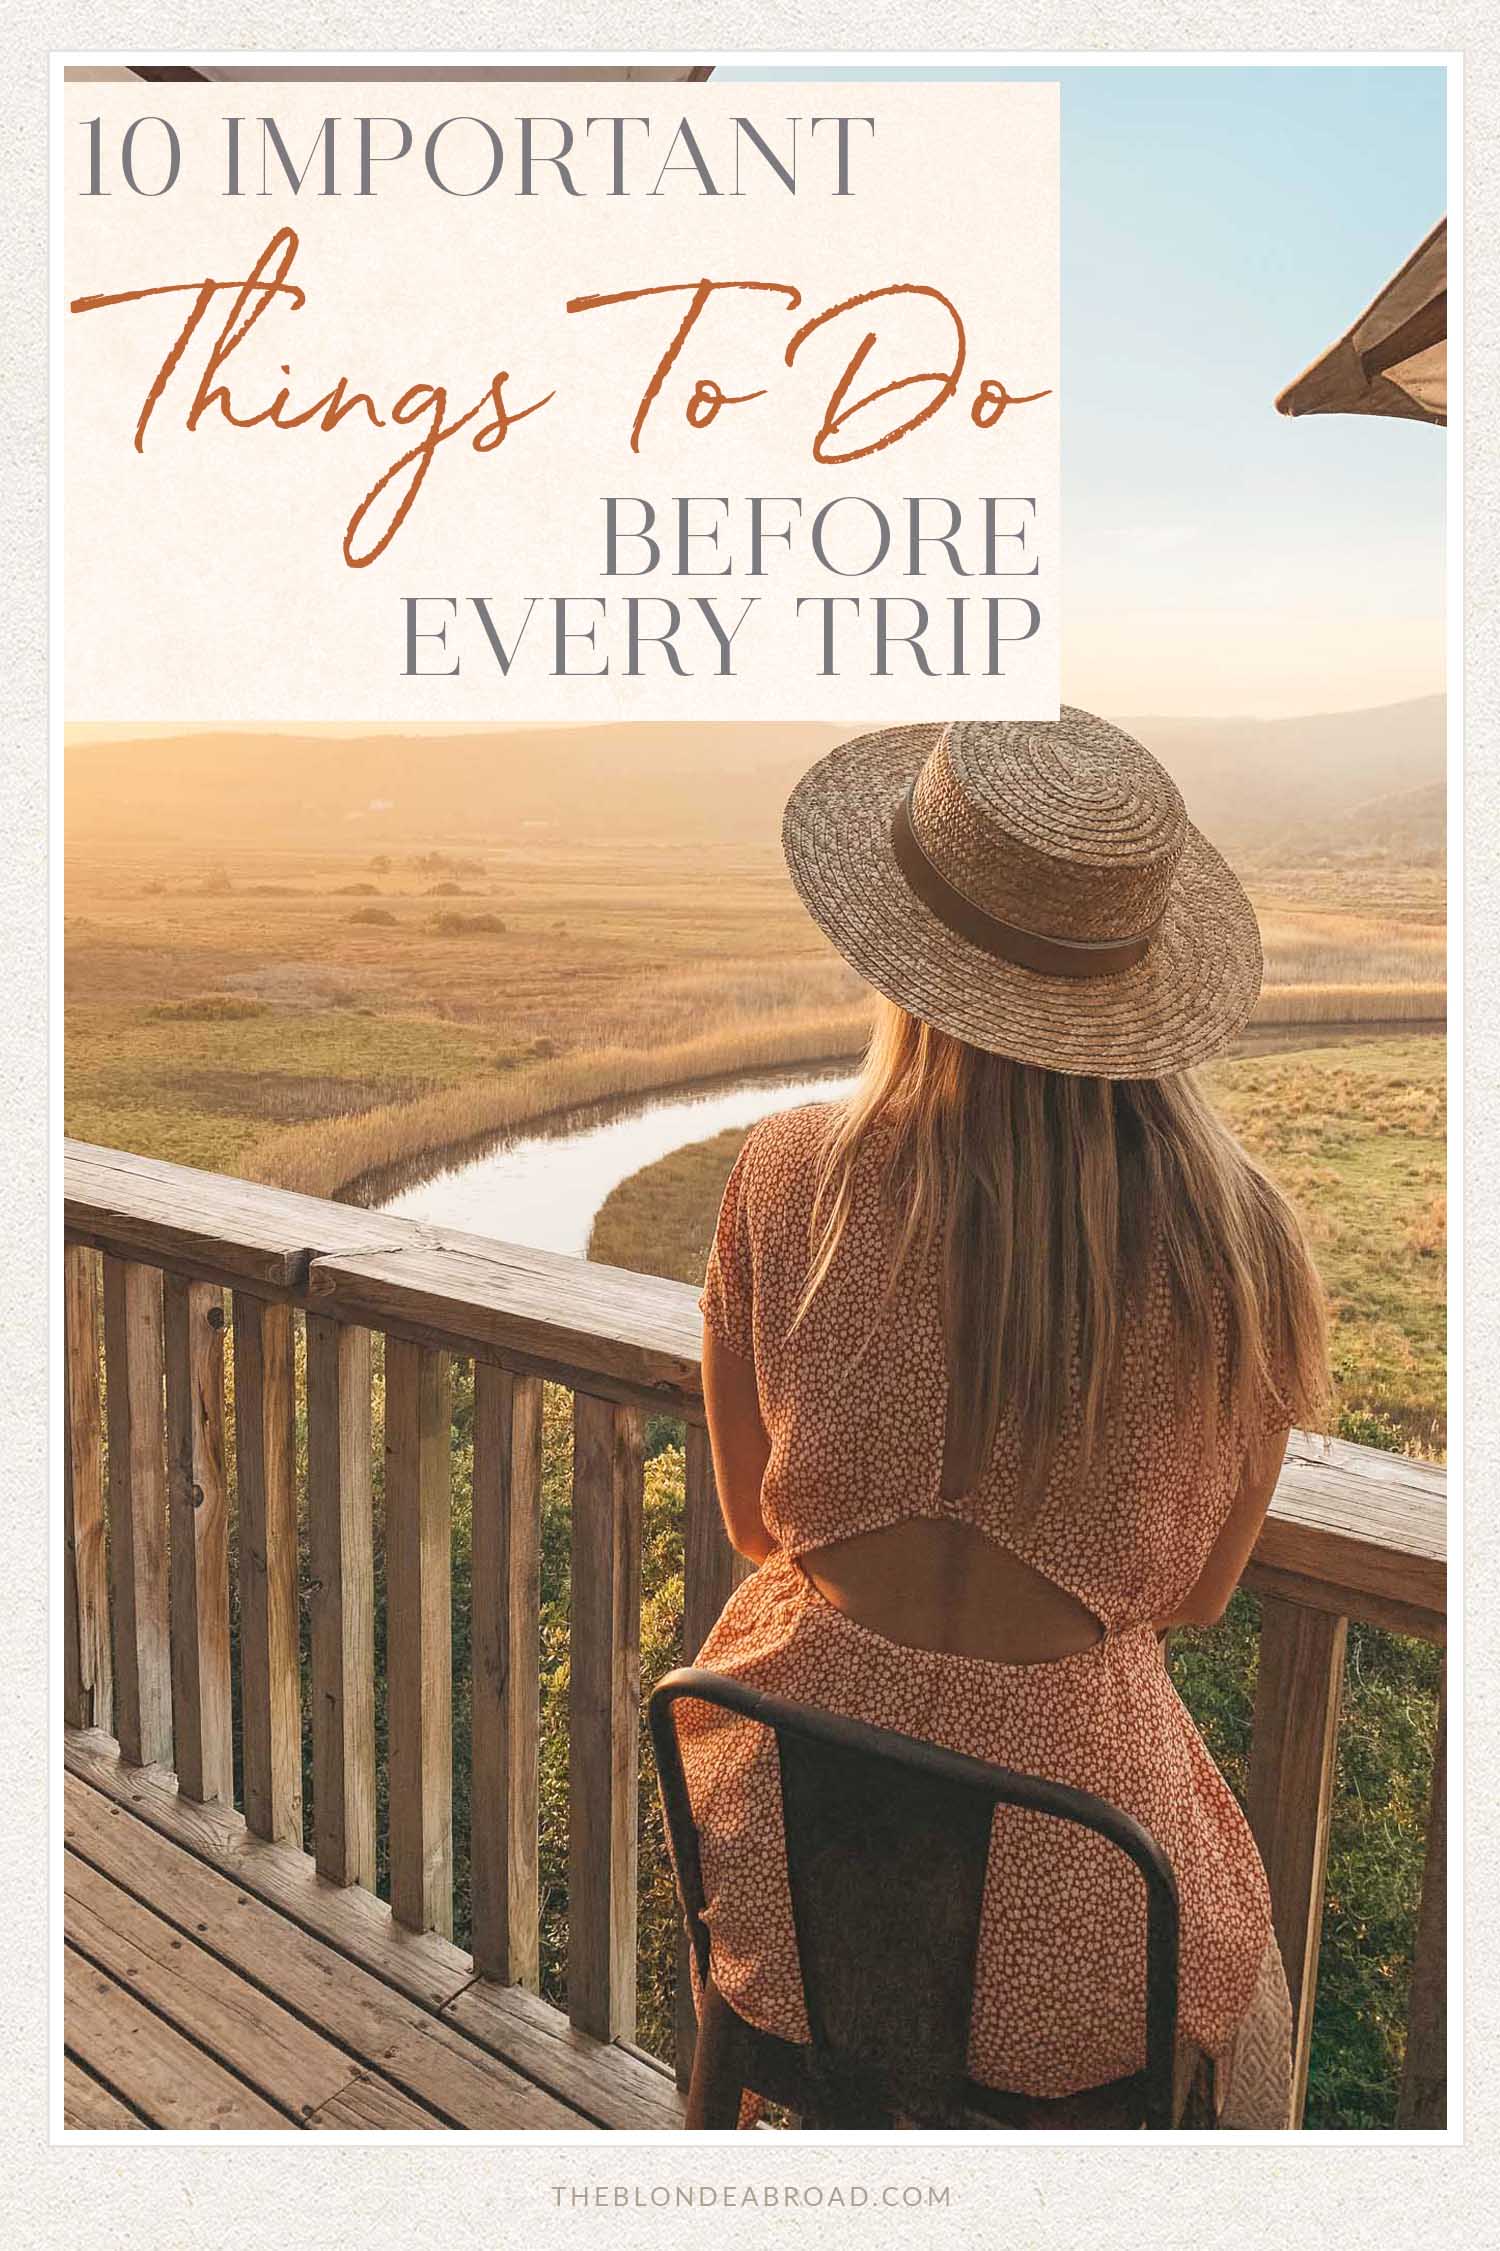 10 Important Things to Do Before Every Trip